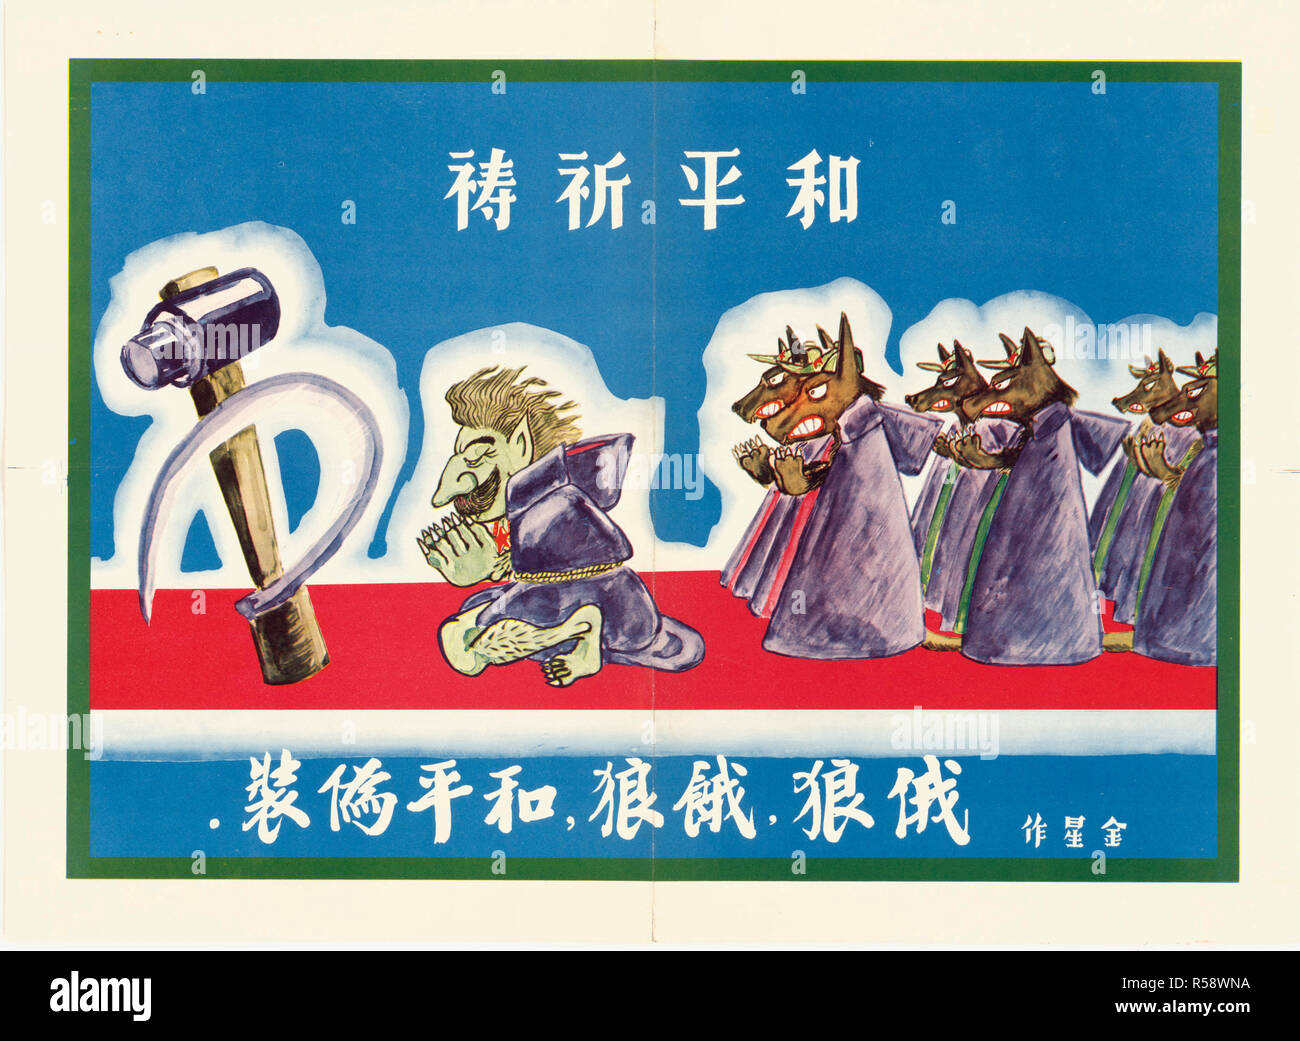 12/4/1951  - U.S. Propaganda Posters in 1950s Asia - The Russian Wolf poster (written in Chinese) Stock Photo